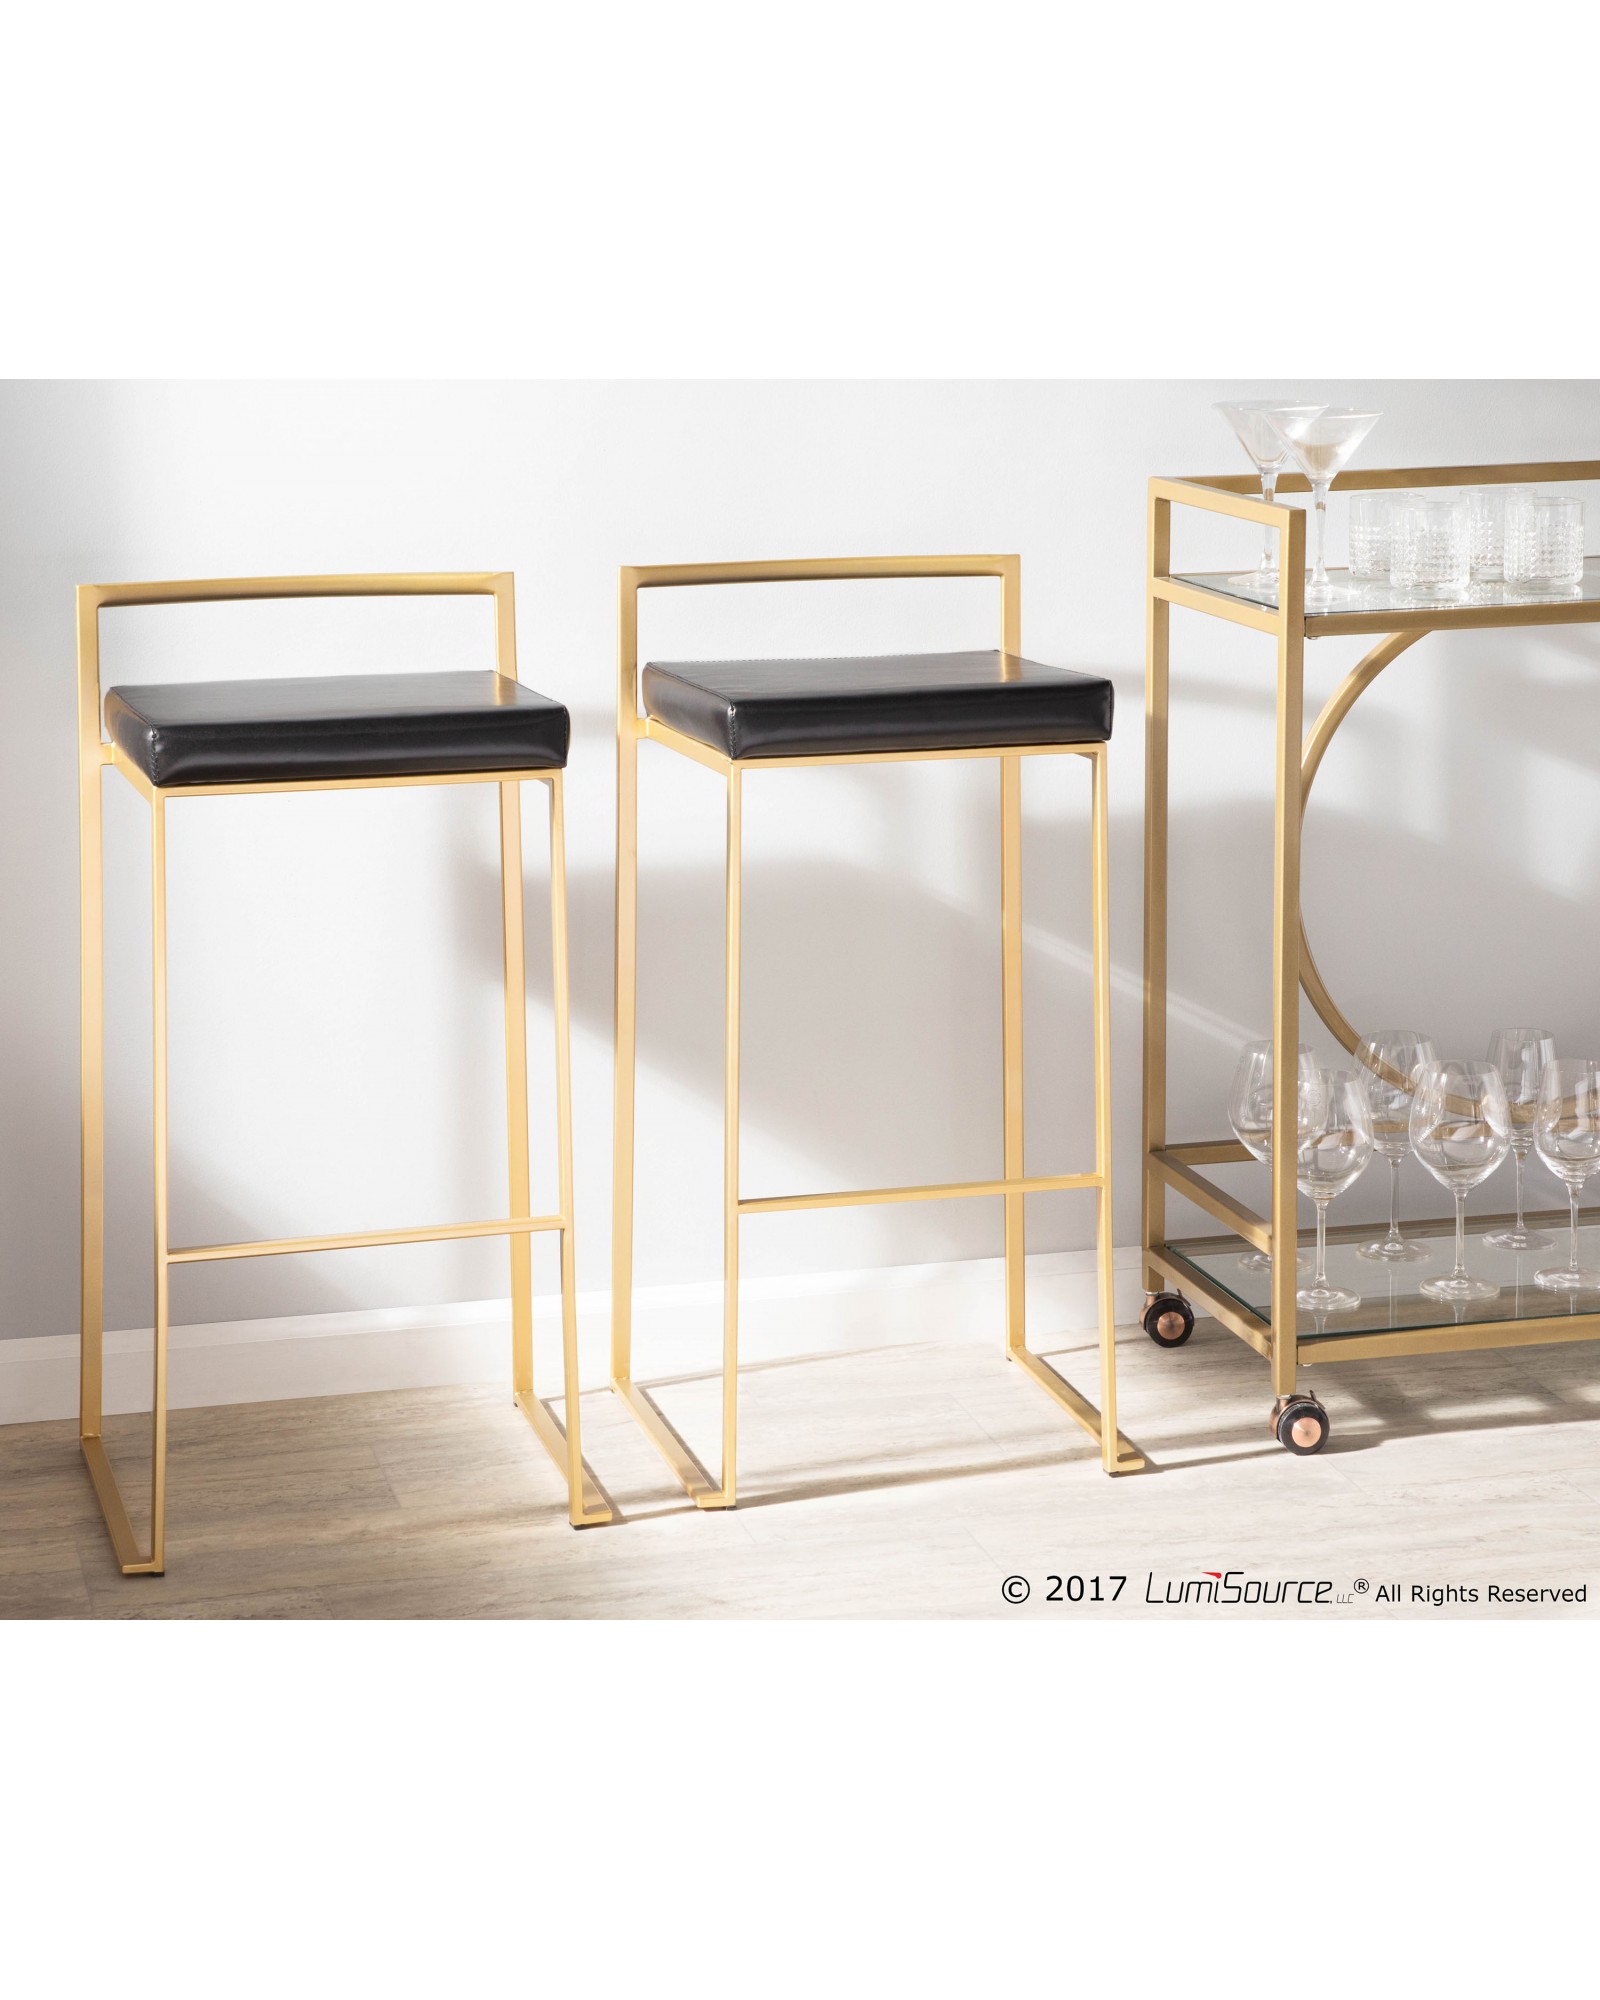 Fuji Contemporary-Glam Barstool in Gold with Black Faux Leather - Set of 2